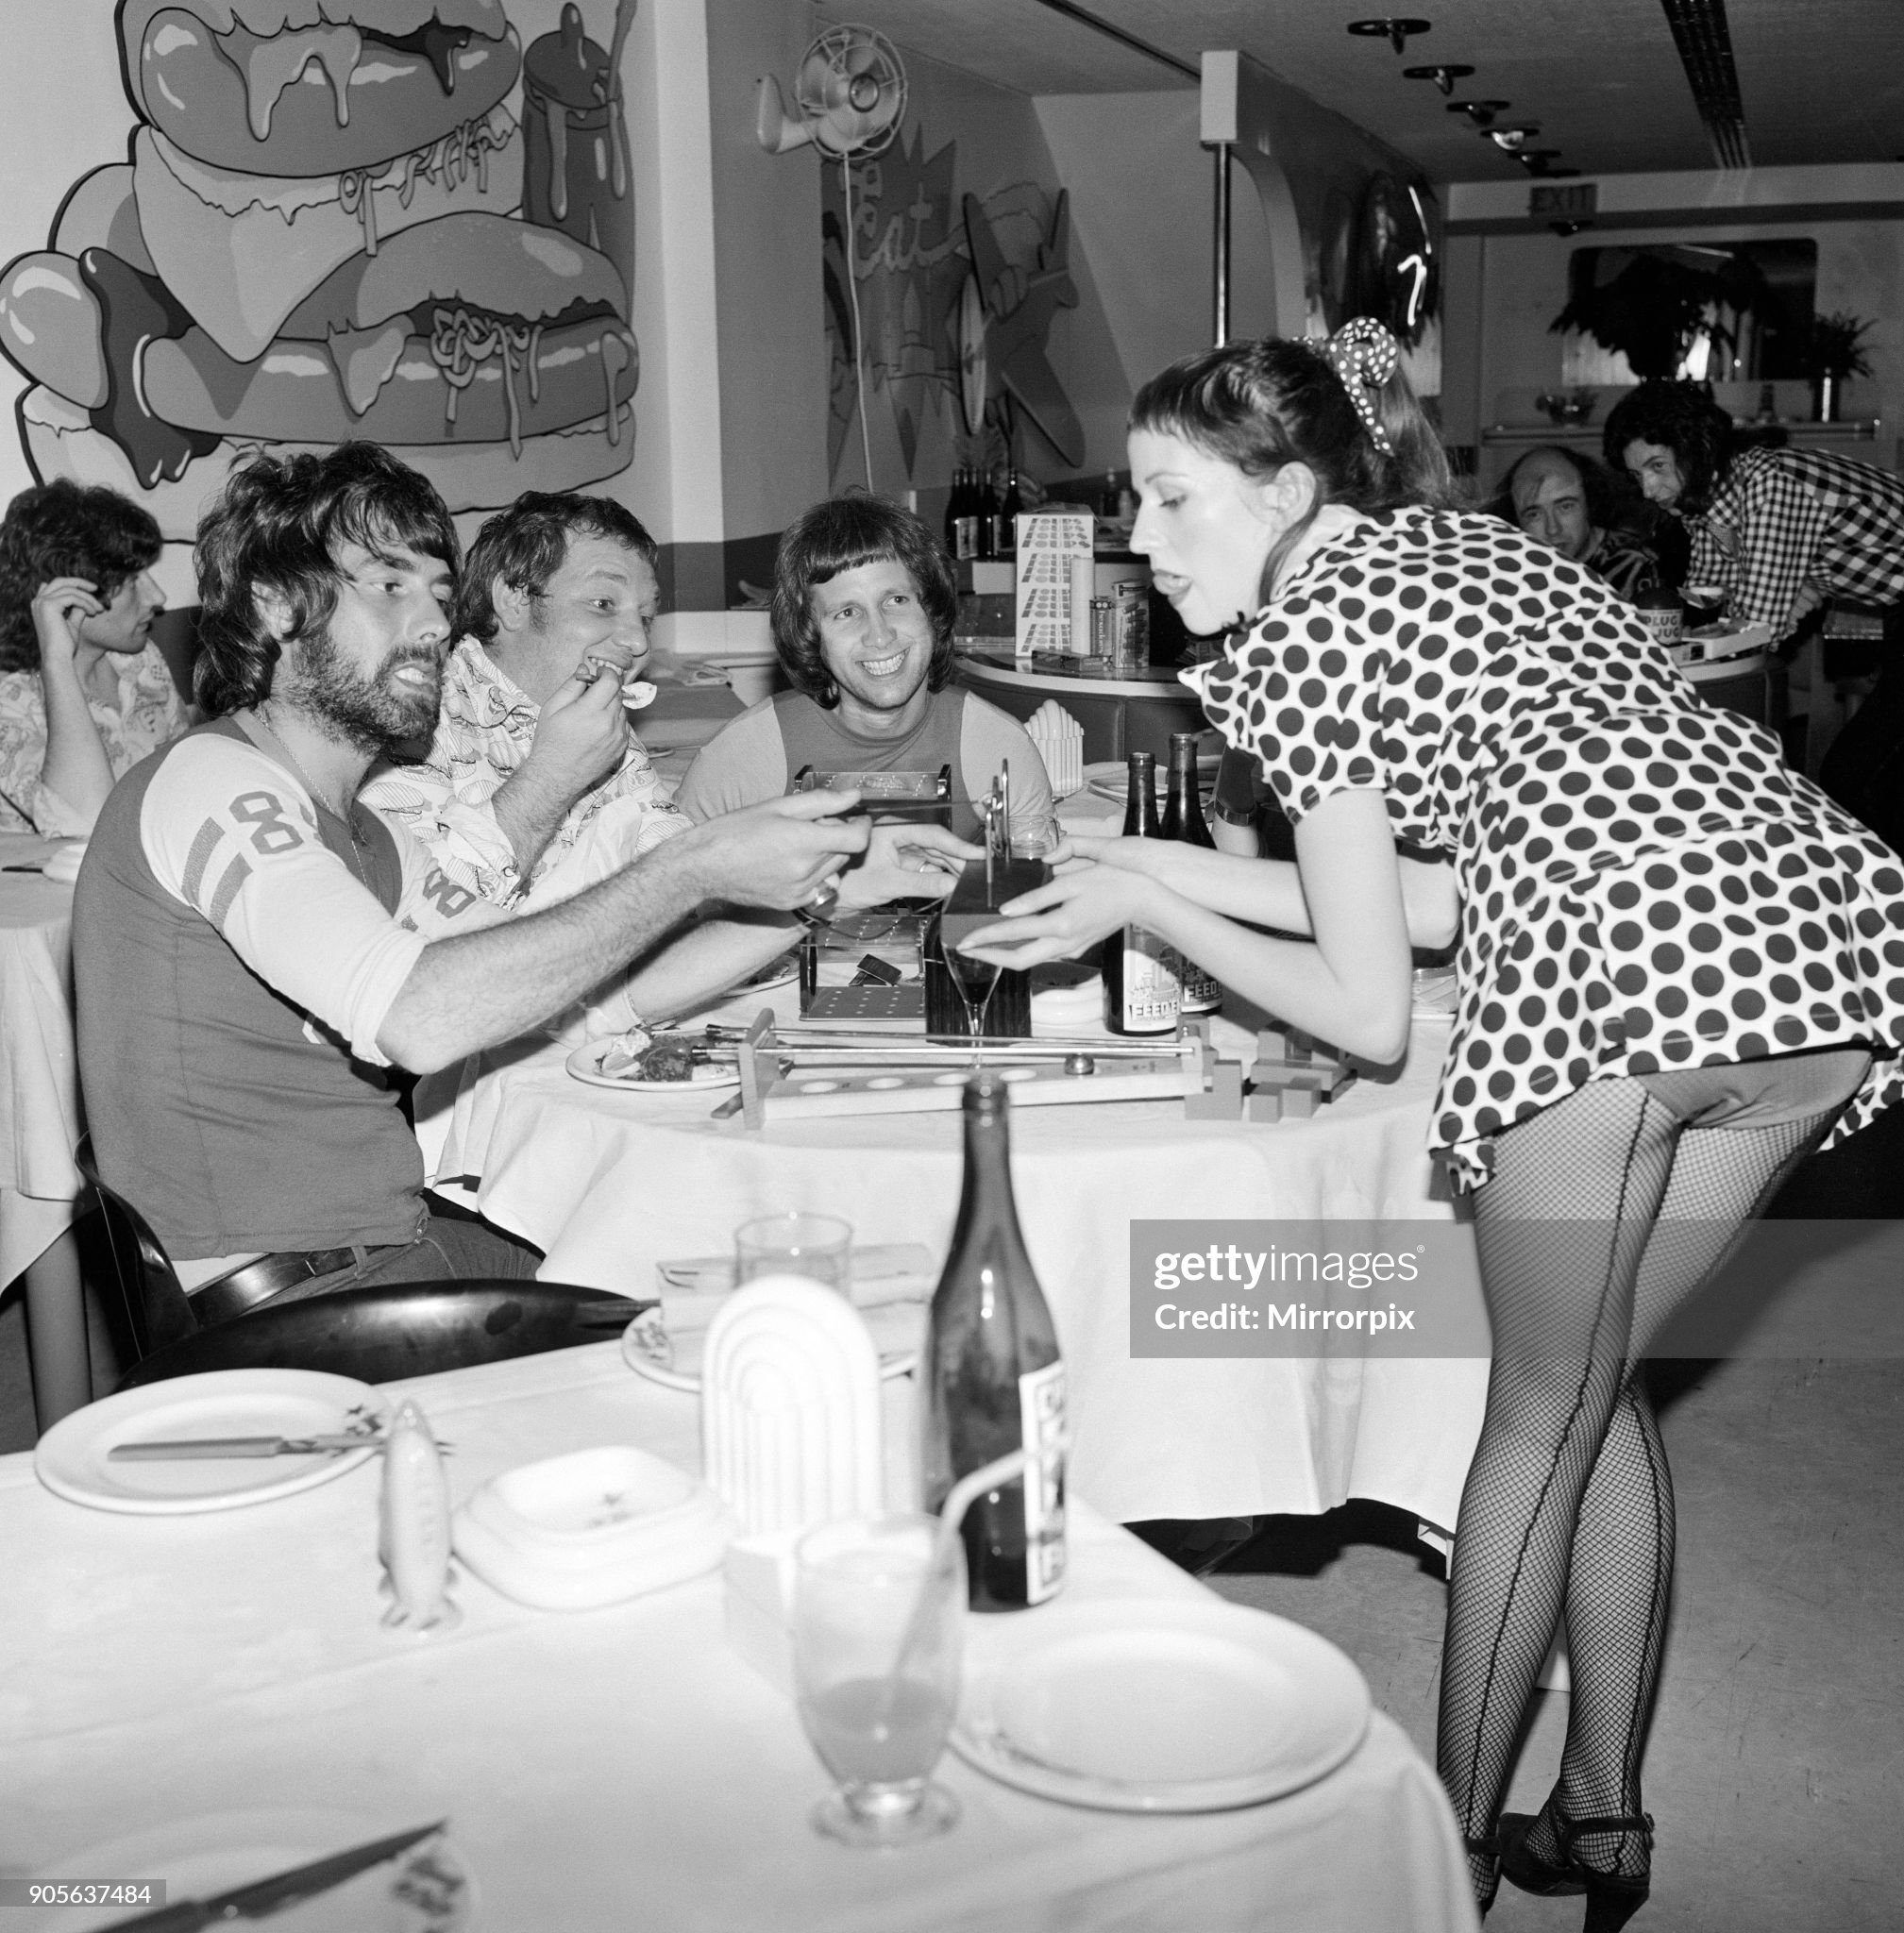 Mr. Freedom's restaurant at 20 Kensington Church street, London, on 30th July 1971. Games mistress Doni with customers and Mr. Freedom’s owner Tommy Roberts, second left, trying out some of the new games.